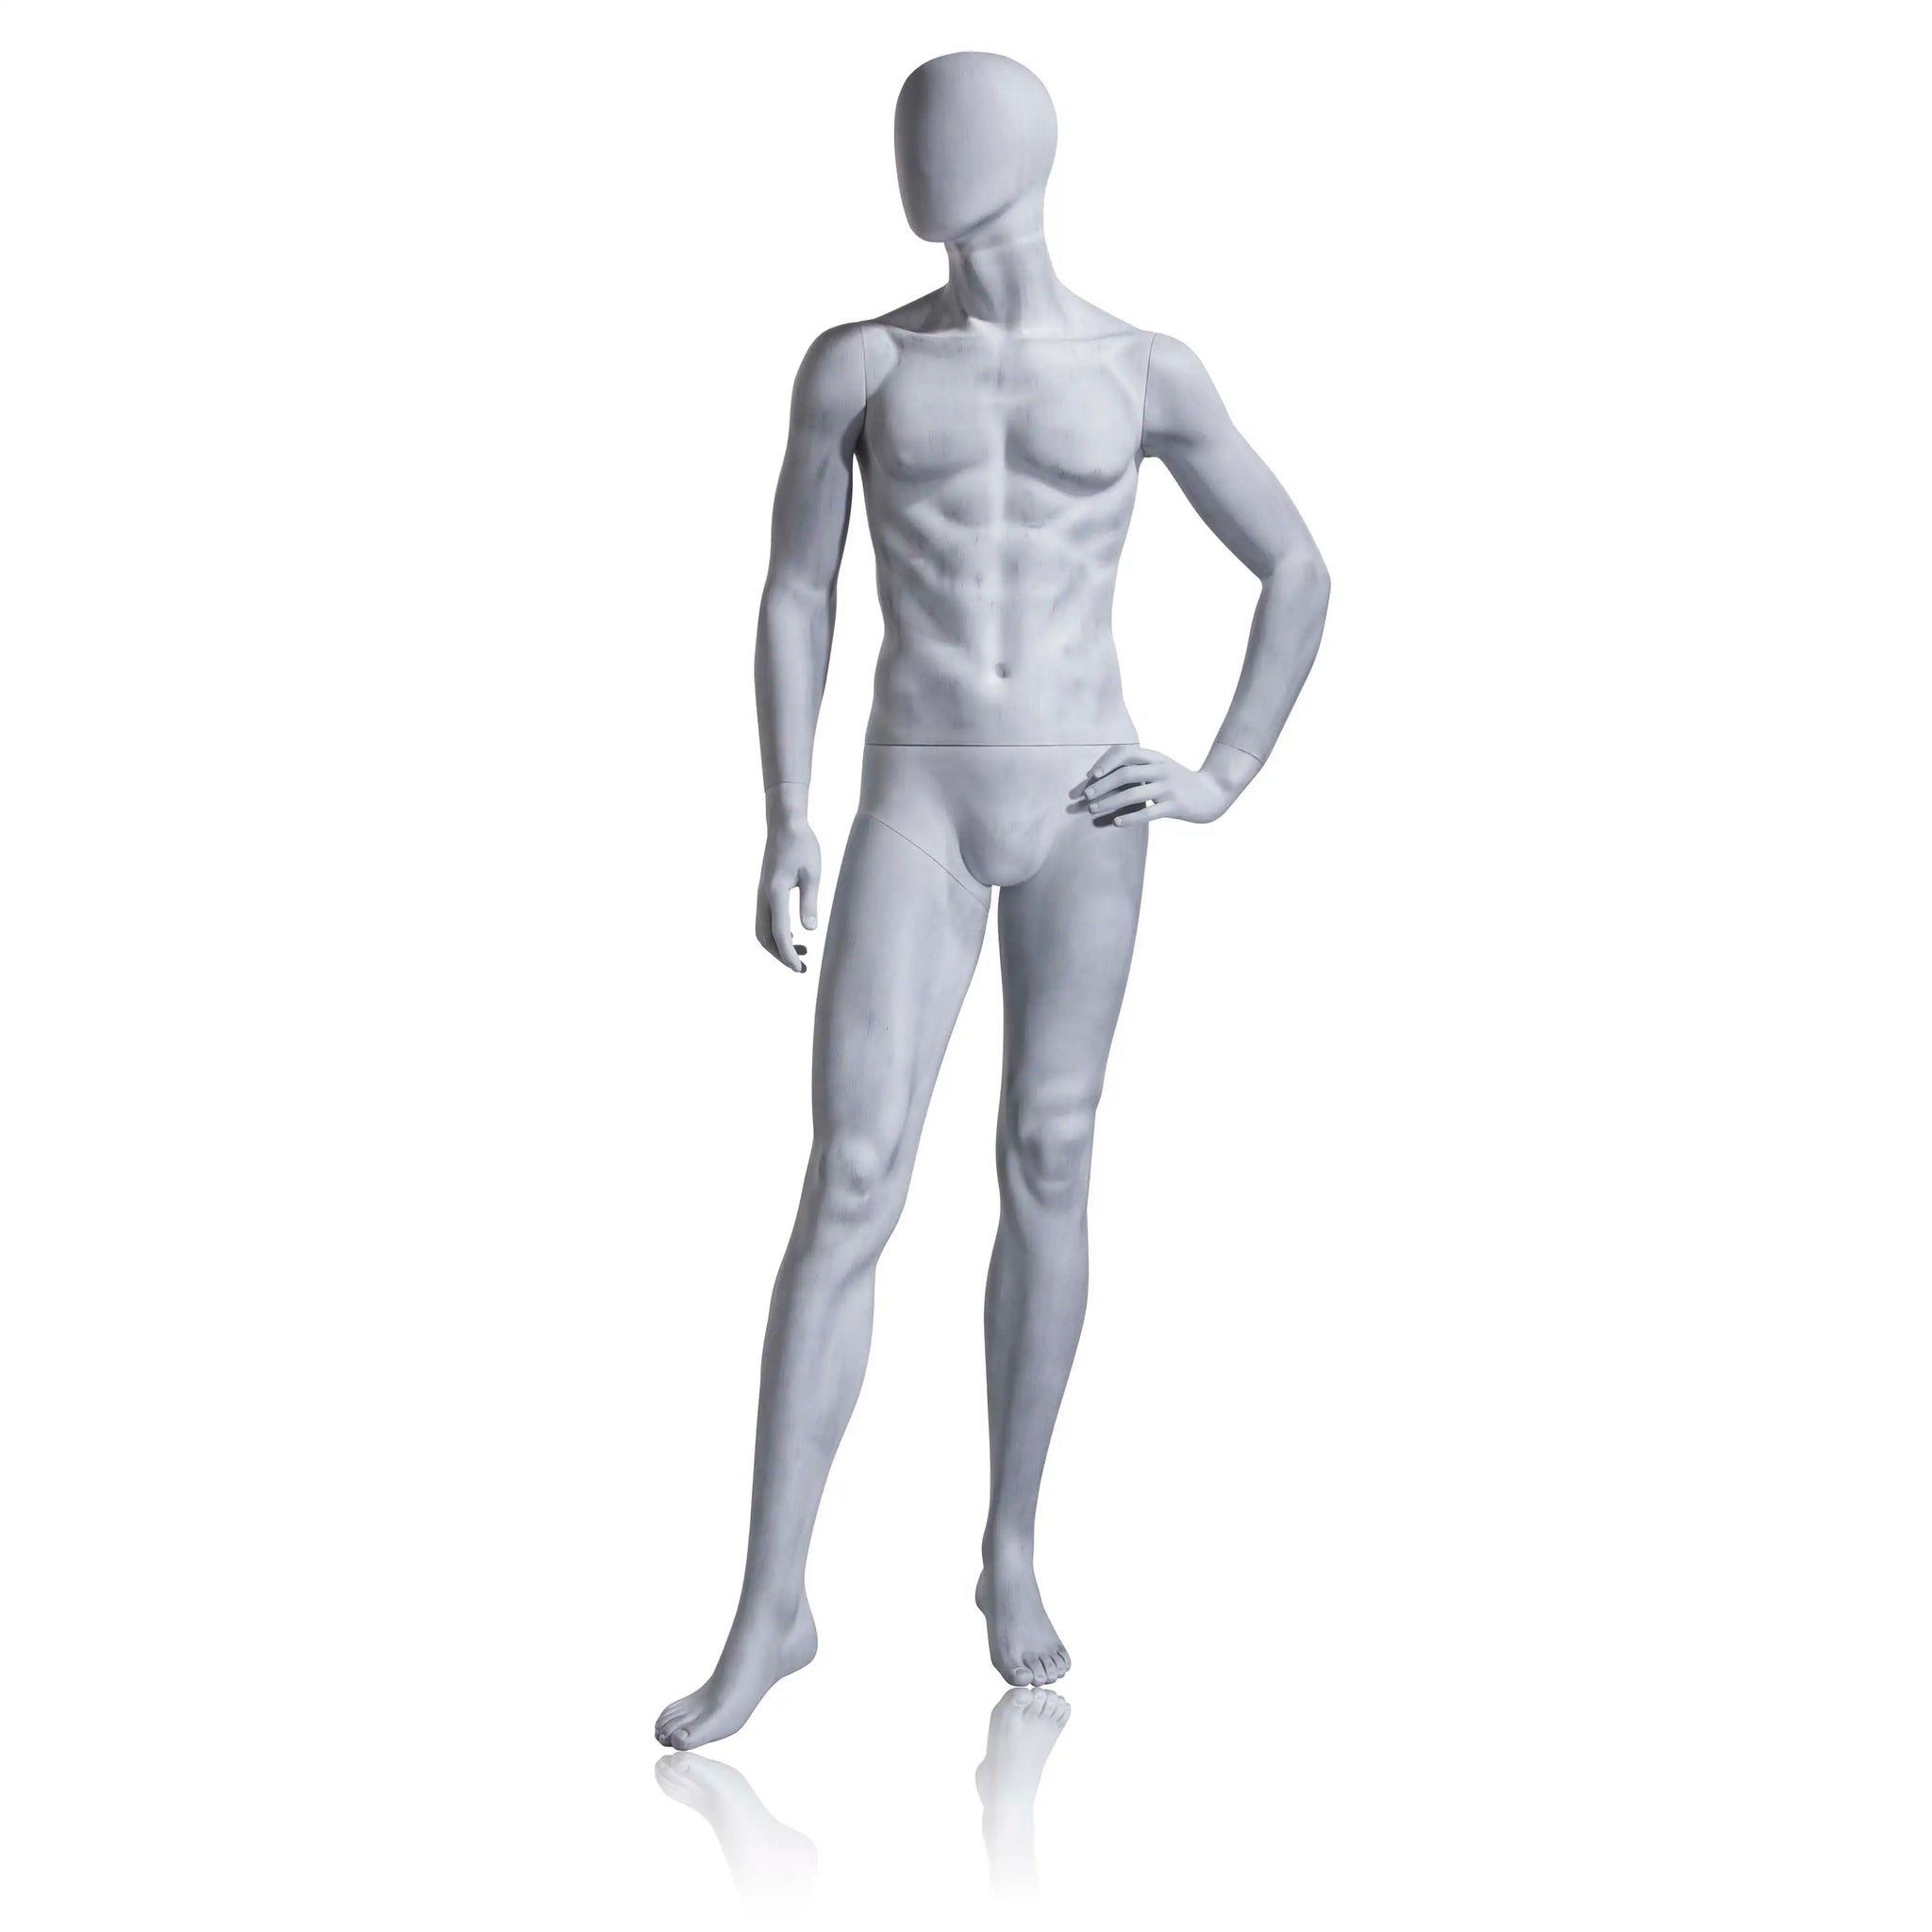 Male Mannequin - Headless, Arms by Side, Left Leg Slightly Forward